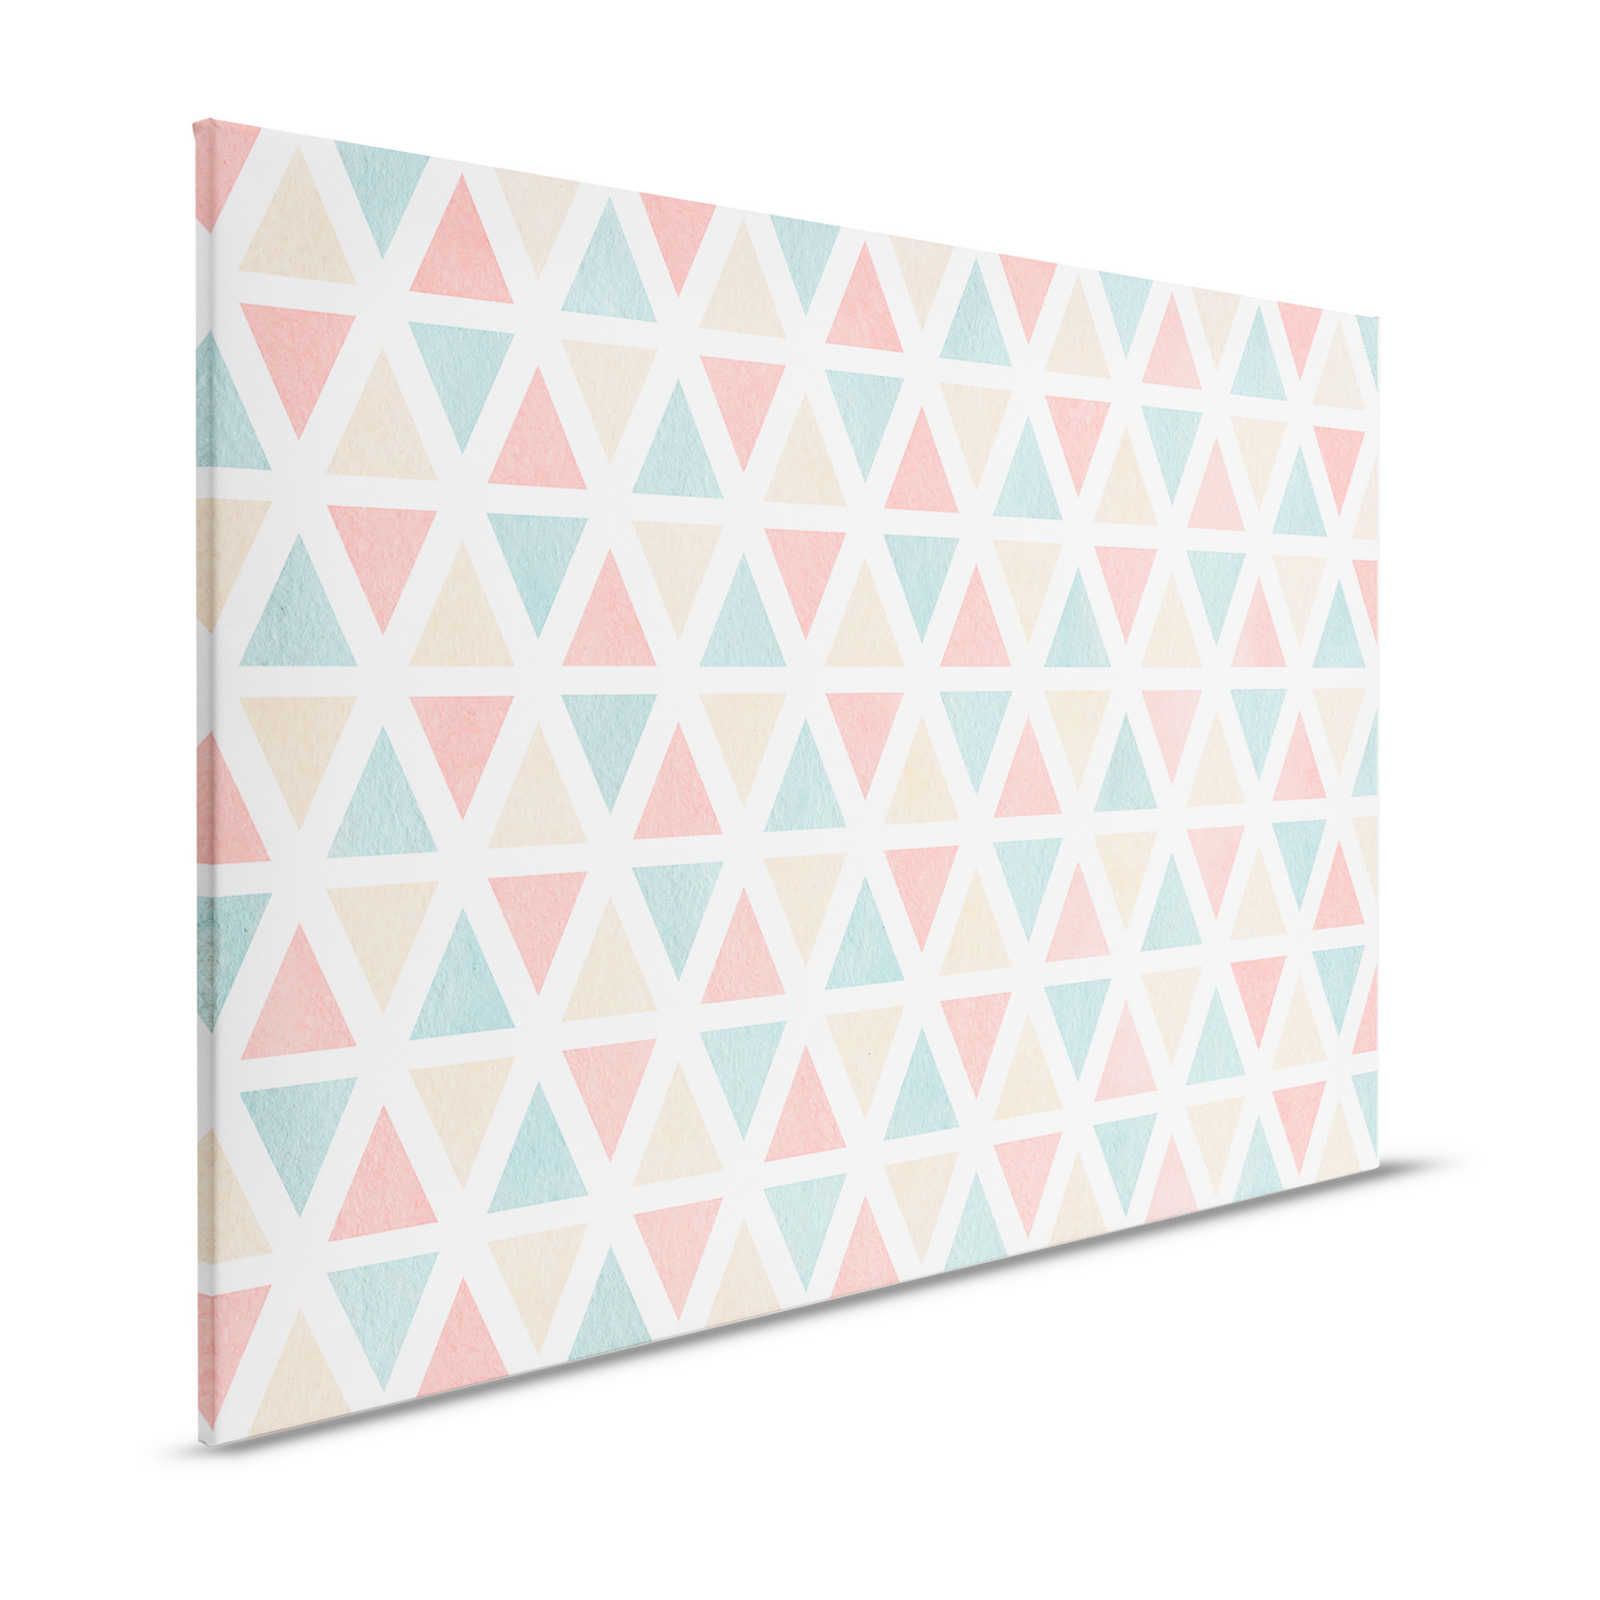 Canvas graphic pattern with colourful triangles - 120 cm x 80 cm
